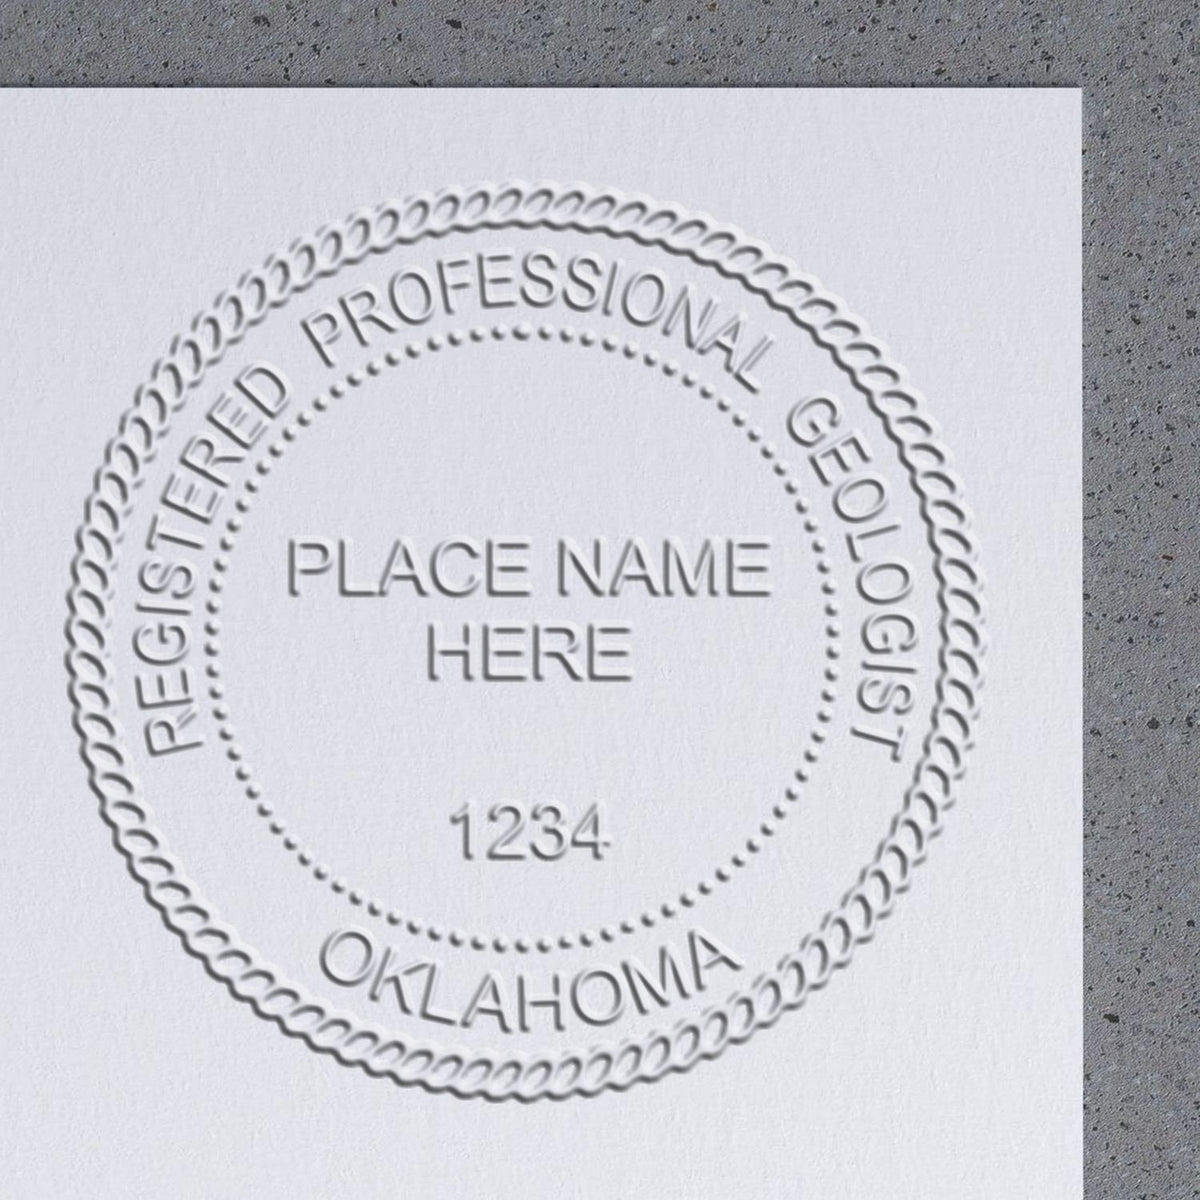 An in use photo of the Gift Oklahoma Geologist Seal showing a sample imprint on a cardstock